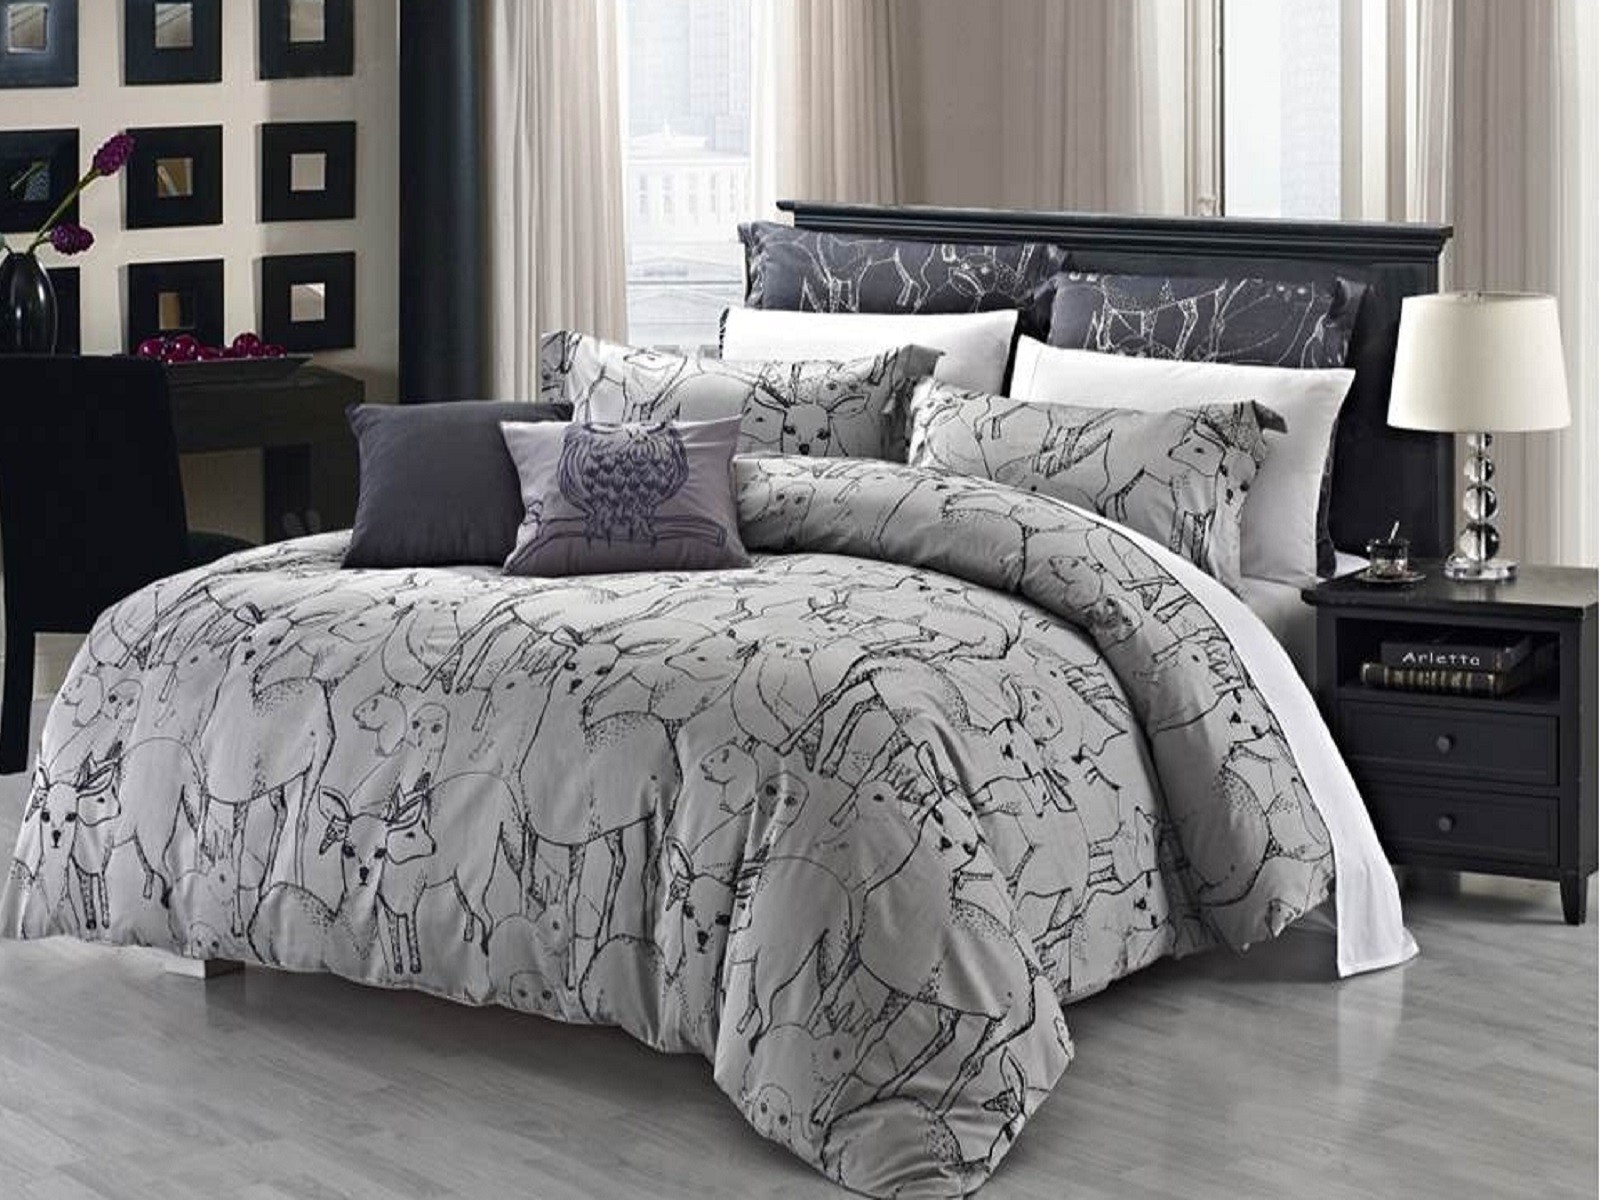 Gray White Print Fascinating Gray White Patterned Animal Print Duvet Cover Set On Wooden Bed With Wooden Nightstand And White Table Lamp Bedroom Exquisite Duvet Cover Sets For Sophisticated Contemporary Bedrooms